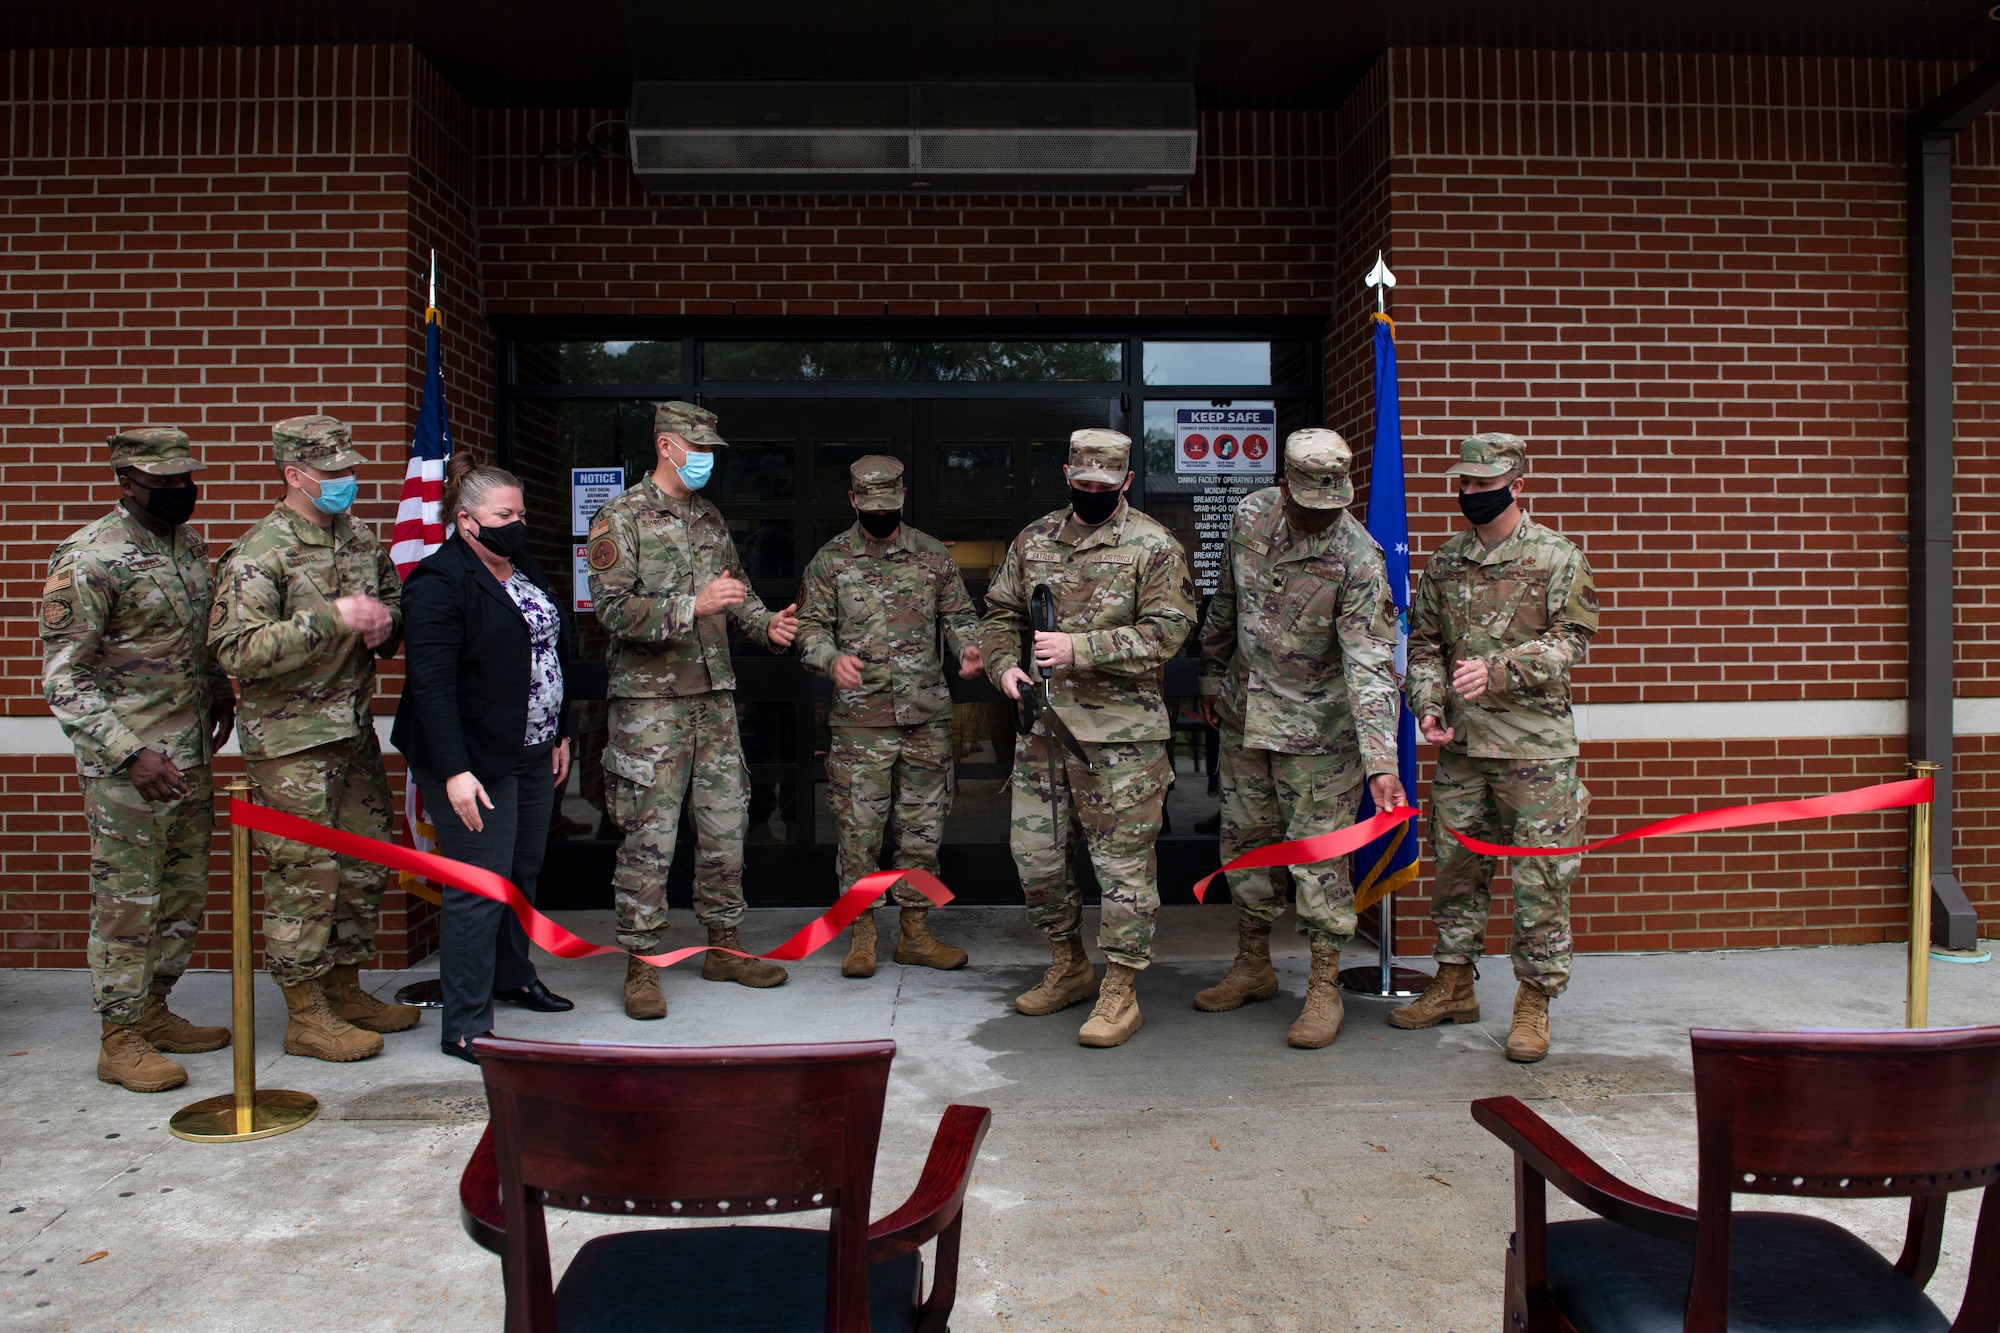 The Southern Eagle Dining Facility at Seymour Johnson Air Force Base has re-opened after two years of renovations.